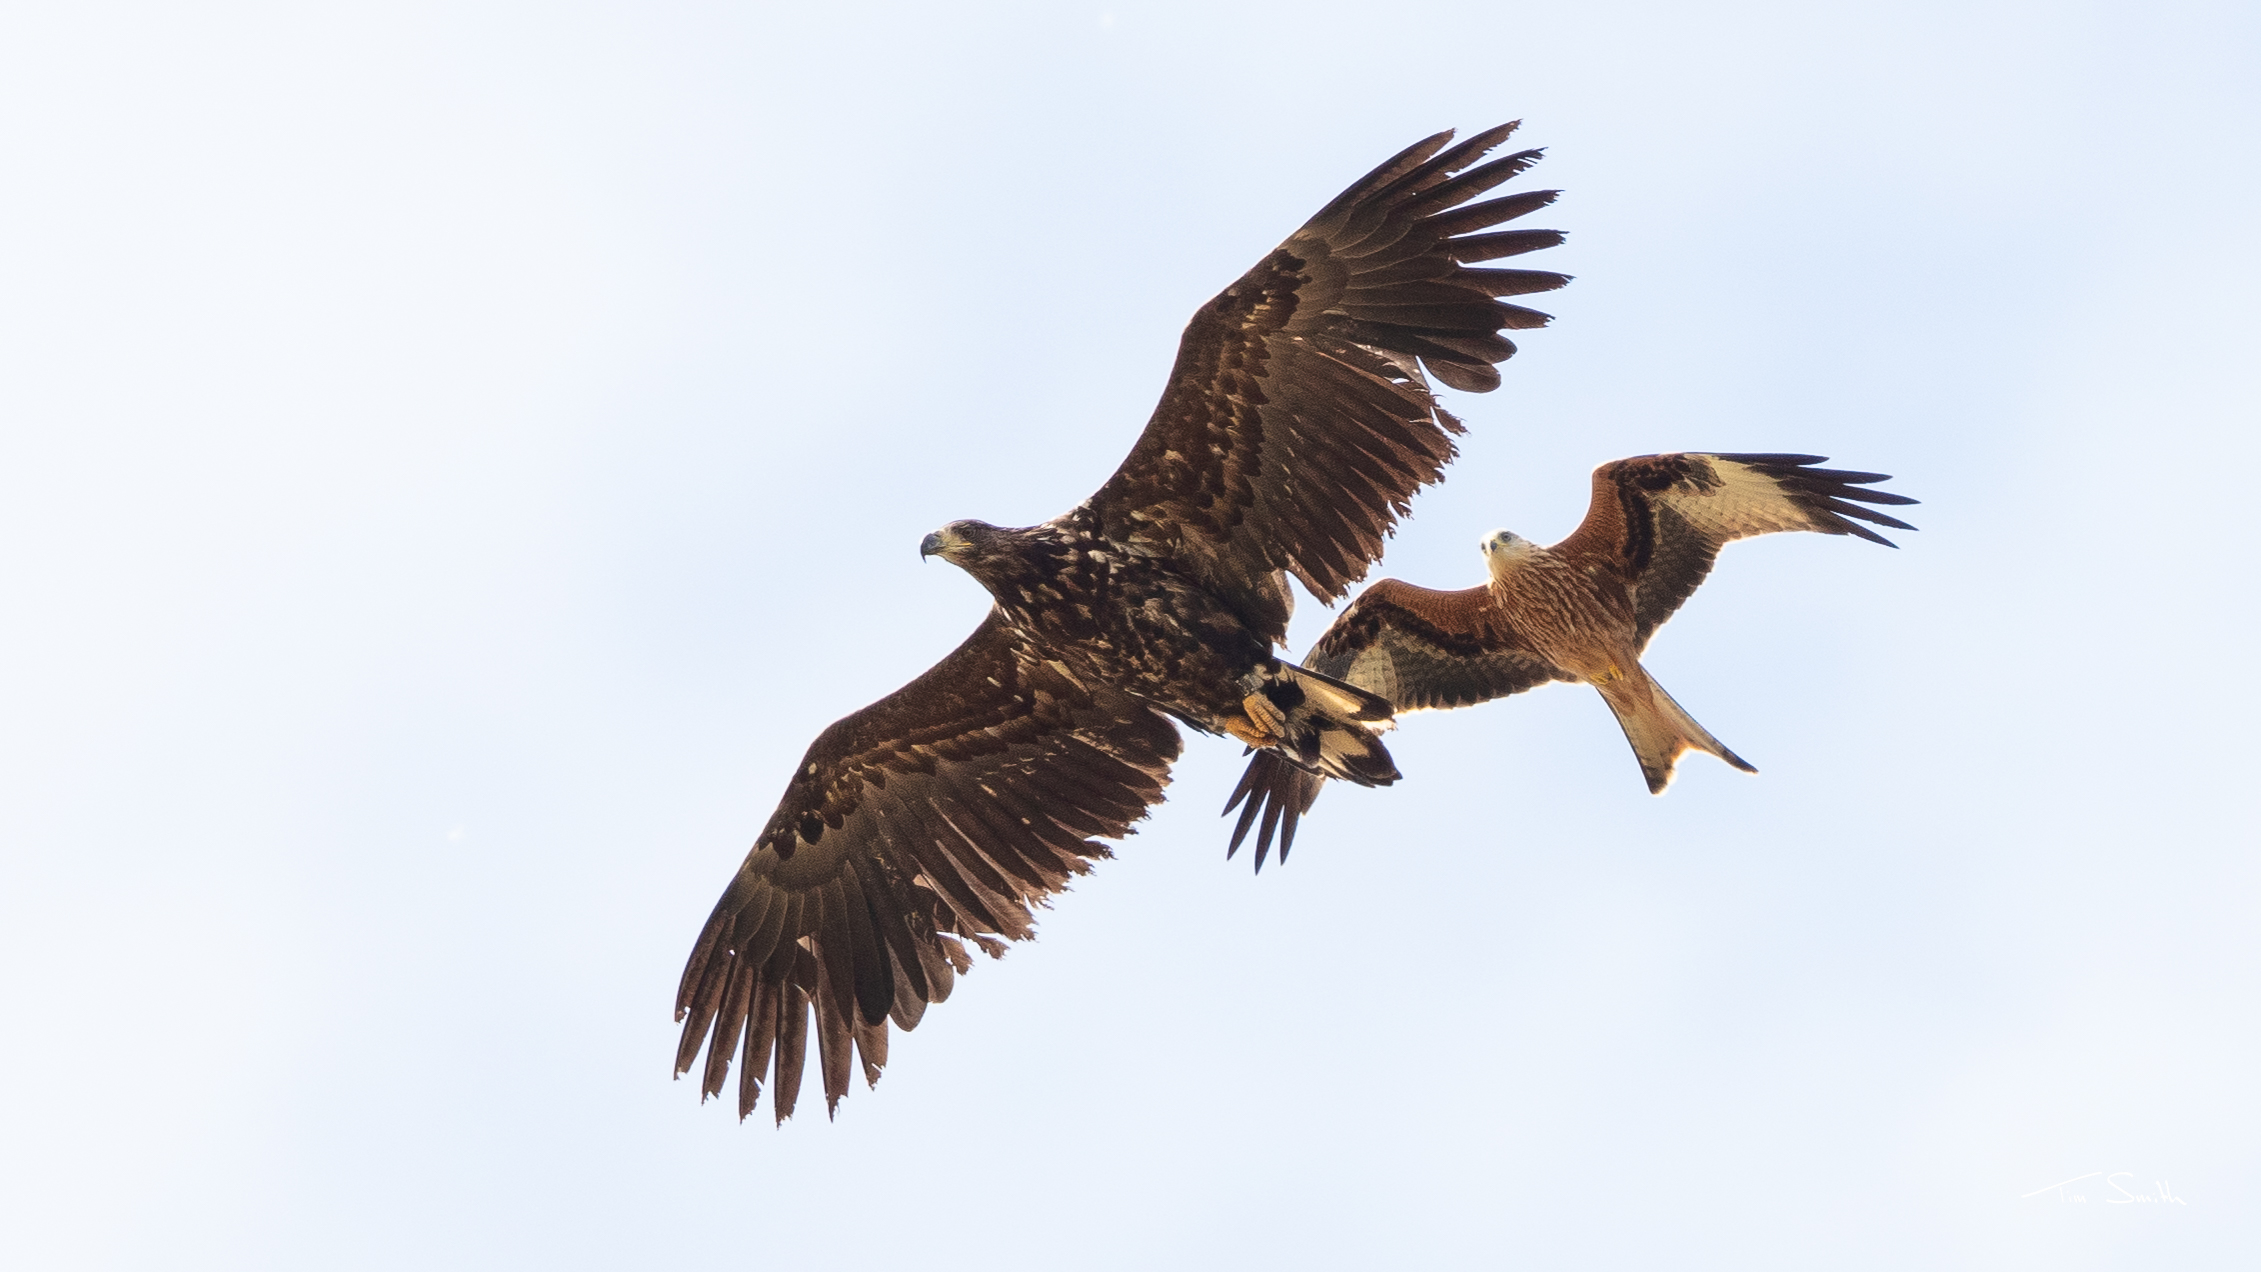 One of the eagle is seen with a red kite in Norfolk as the class of 2019 explored England in the summer (Tim Smith/PA)